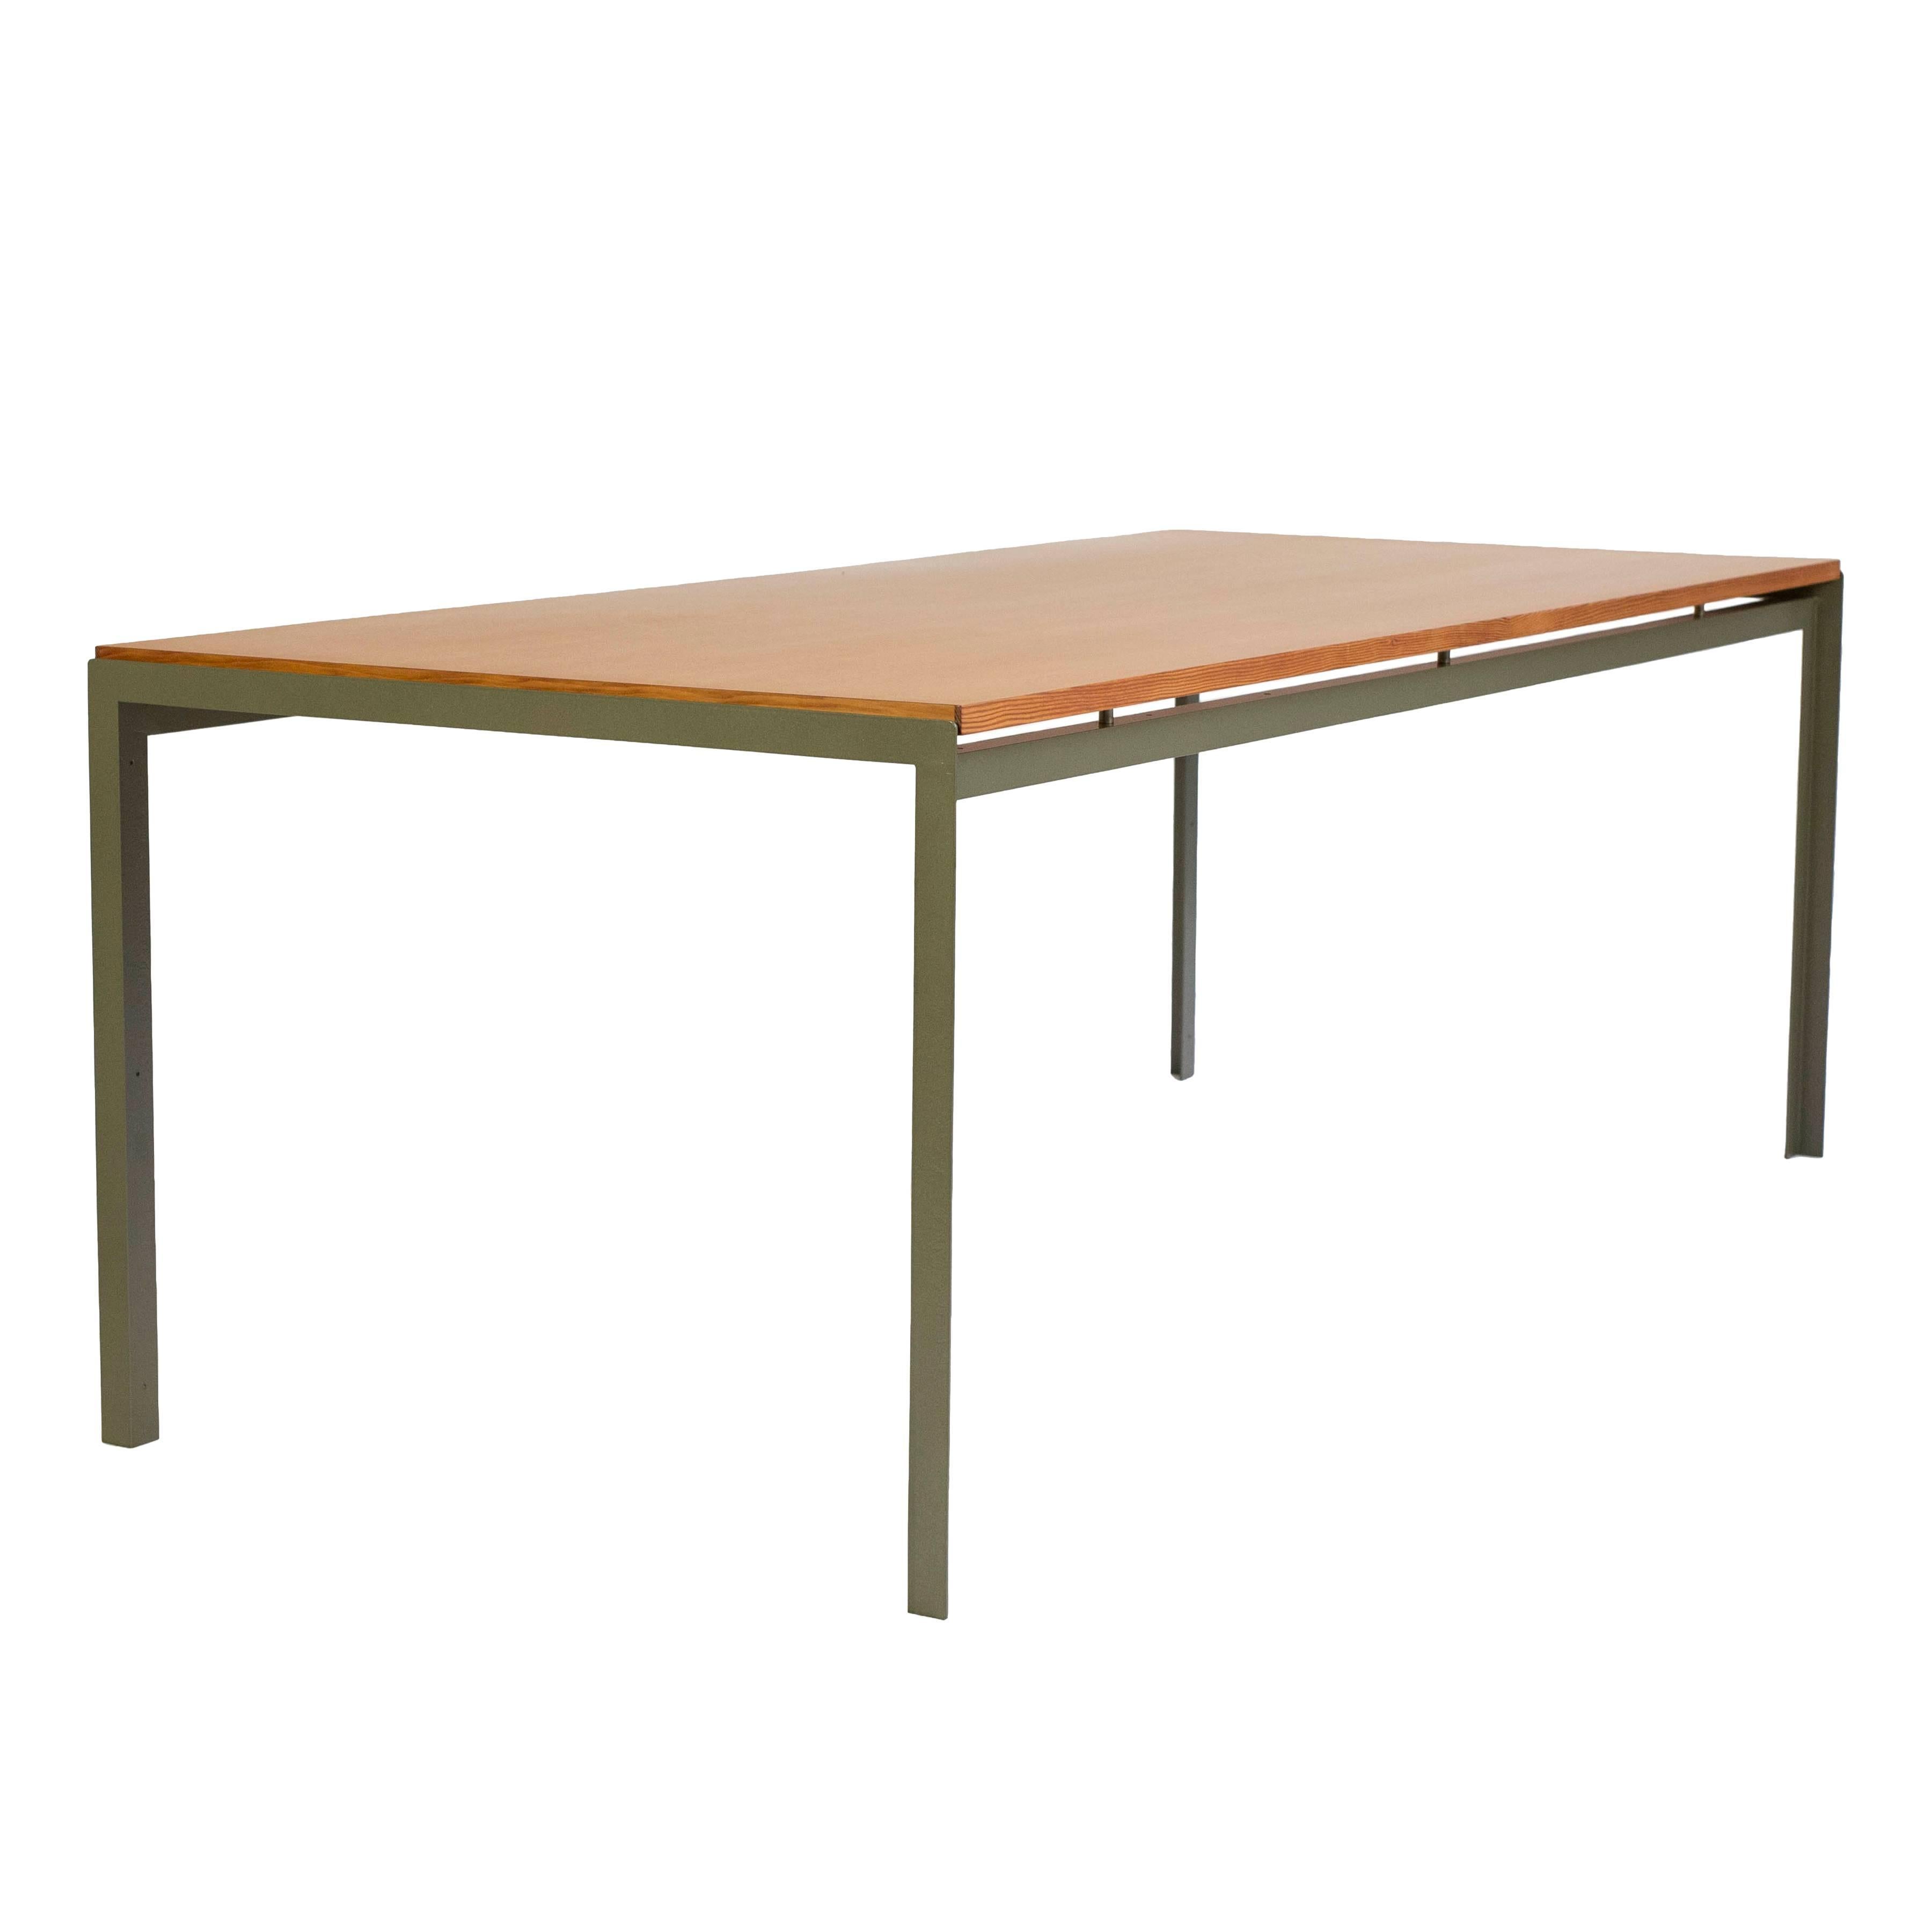 Poul Kjaerholm 'Professor's desk with grey lacquered metal frame and top of Oregon pine. 

Designed by Poul Kjaerholm for the Royal Danish Academy of Fine art in Copenhagen, 1955. Executed by Rud. Rasmussen cabinetmakers. Fine condition.
 